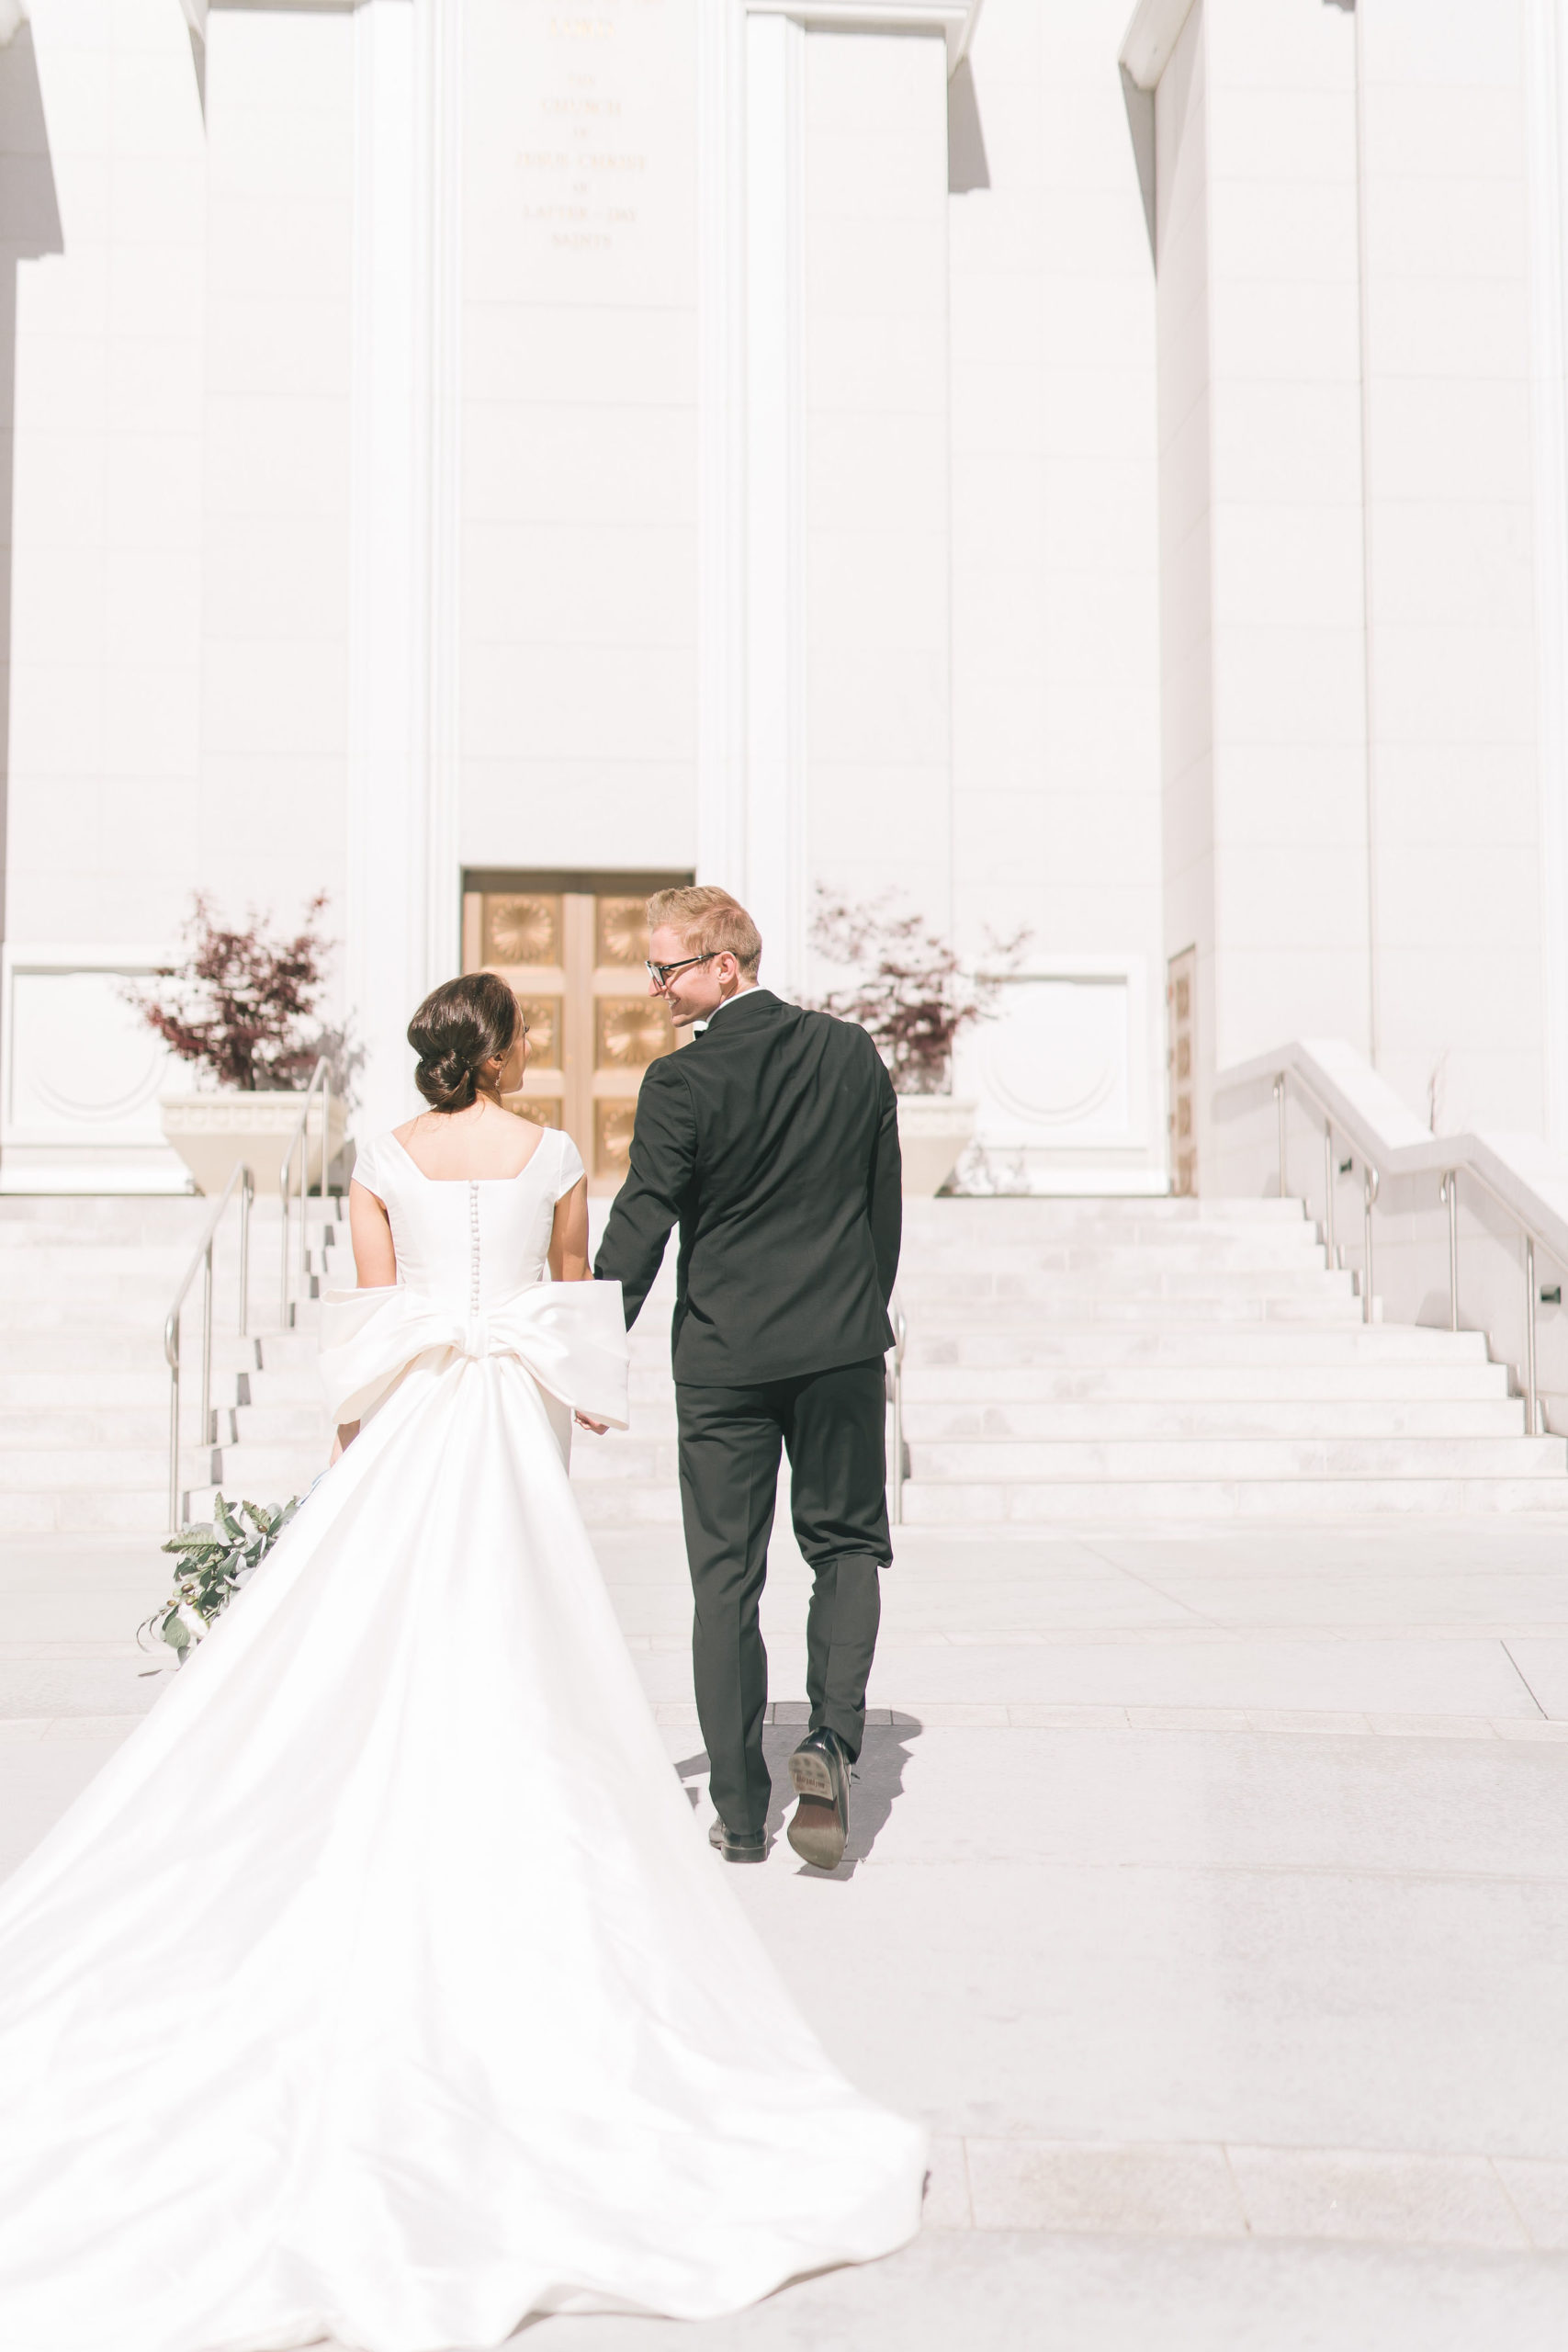 Amalfi Coast Themed Wedding bright beautiful Italian wedding picture of bride holding hands with her towards an lds temple in Utah as they look to each other and smile